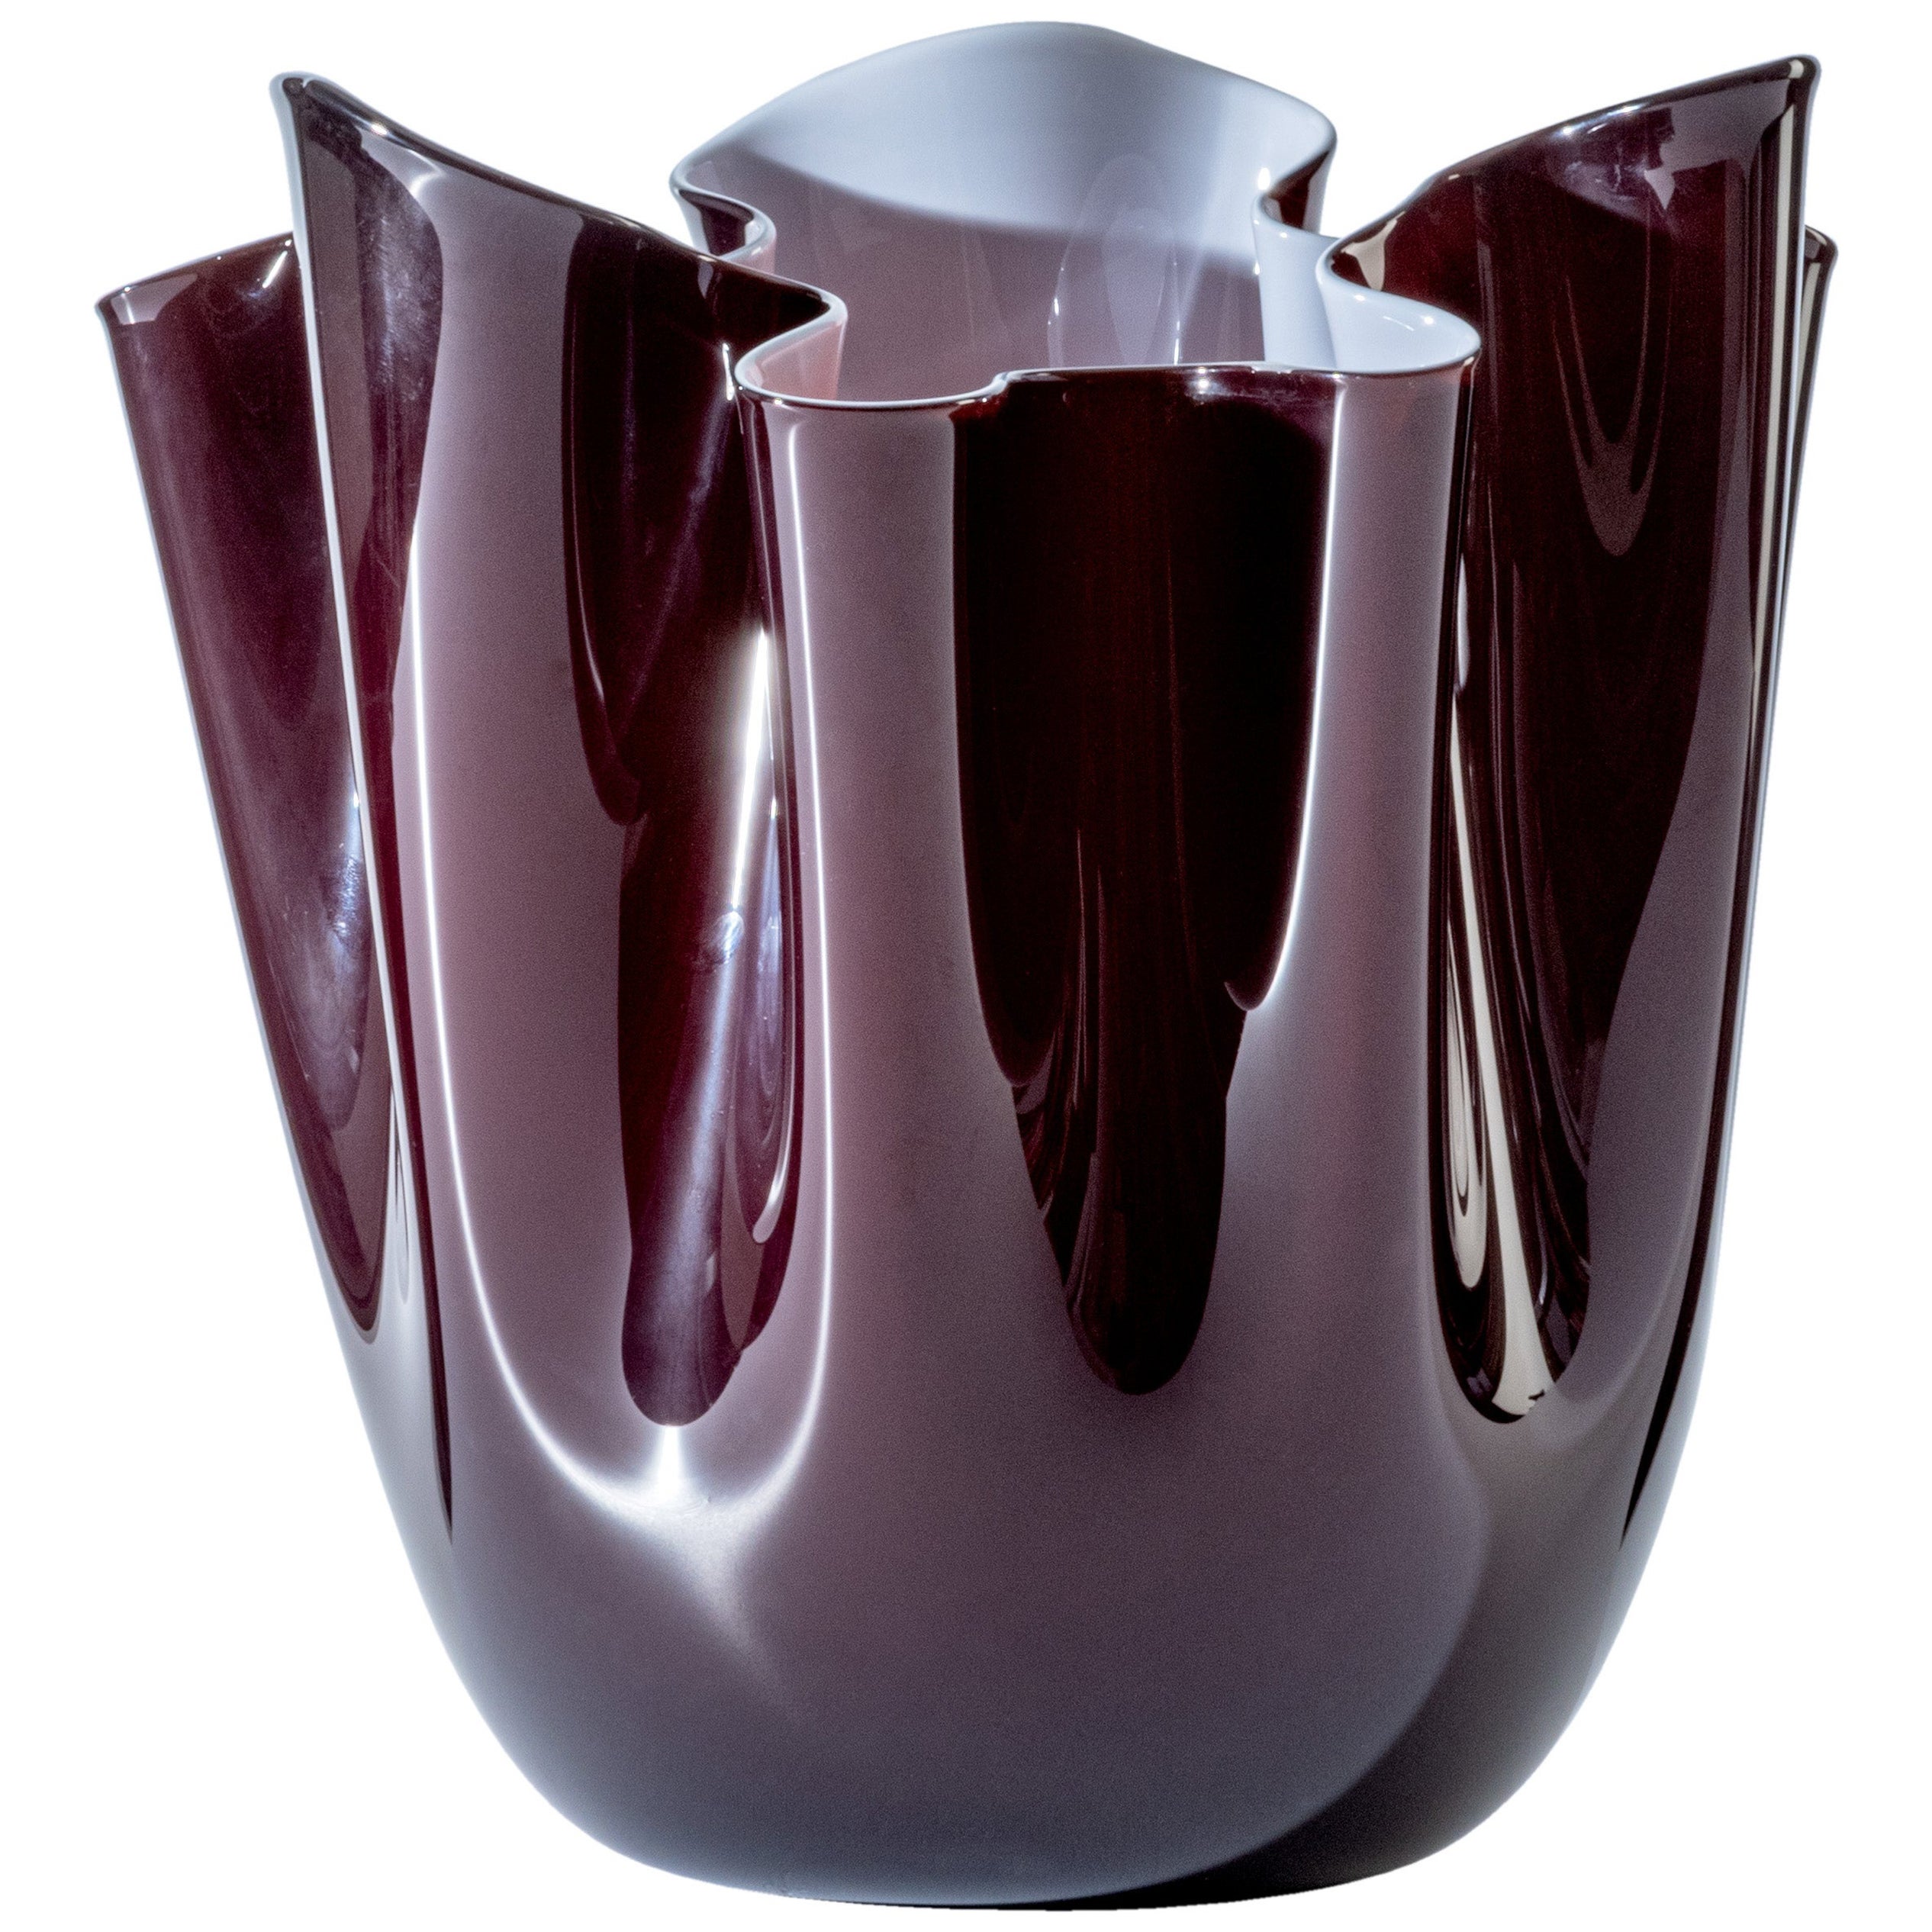 Fazzoletto Bicolore Large Vase in Ox Blood Red & Cipria Pink For Sale